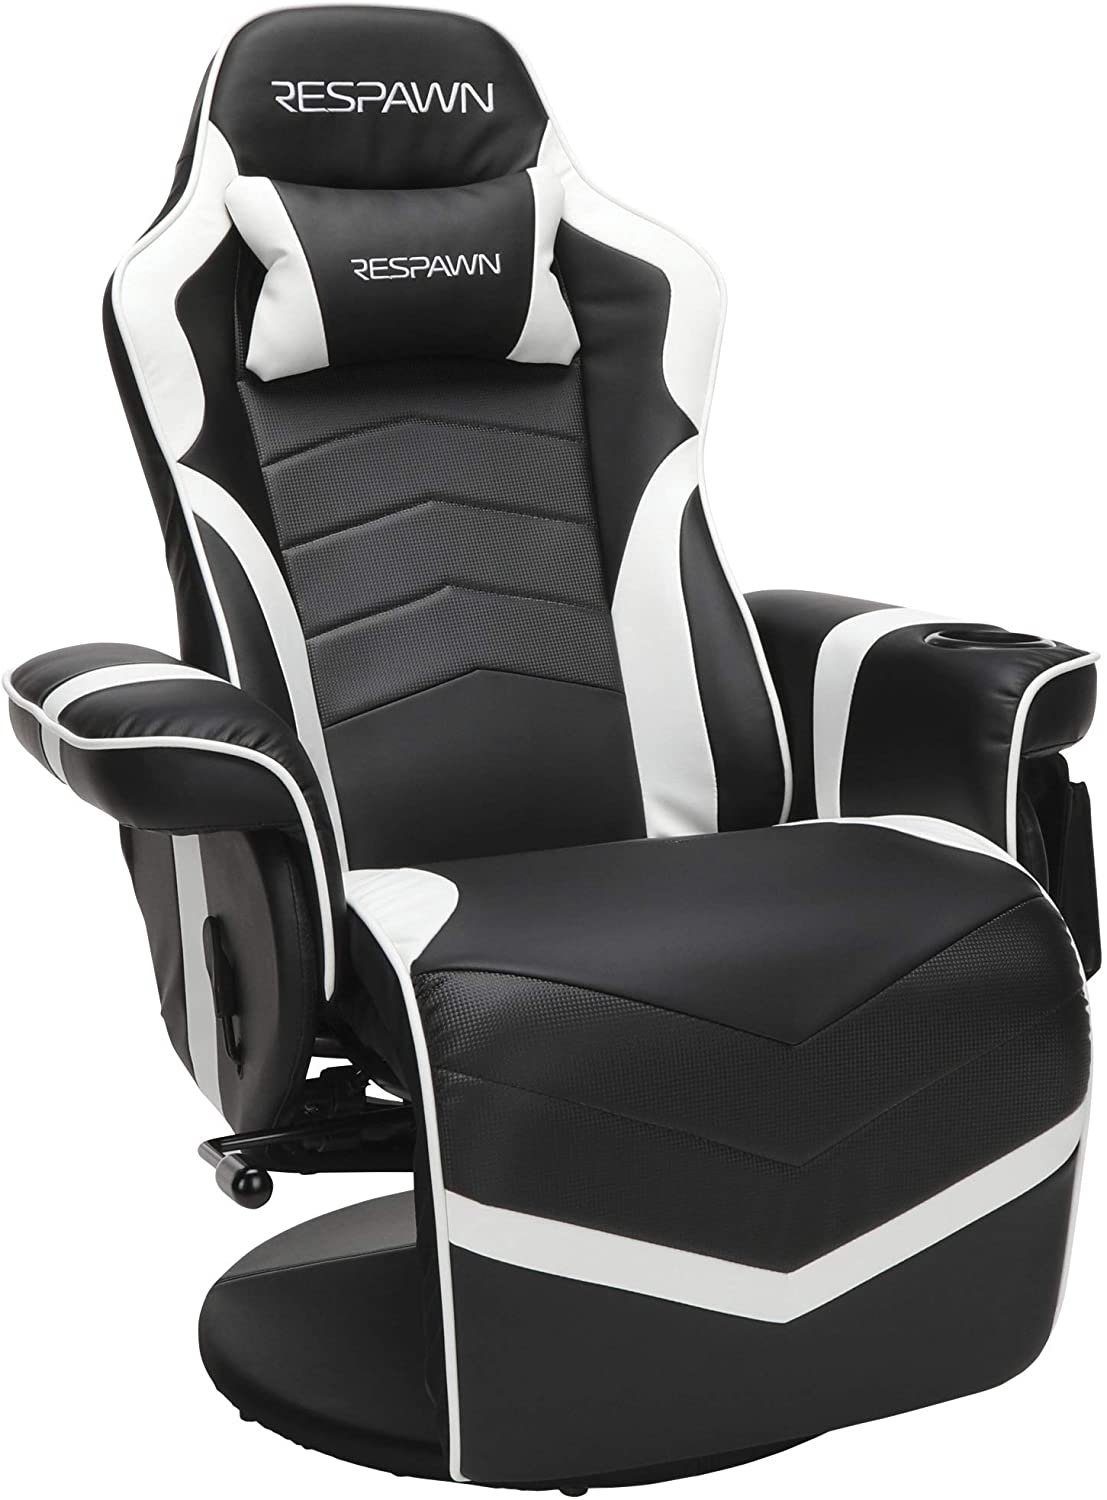 RESPAWN RSP-900 Reclining Gaming Chair